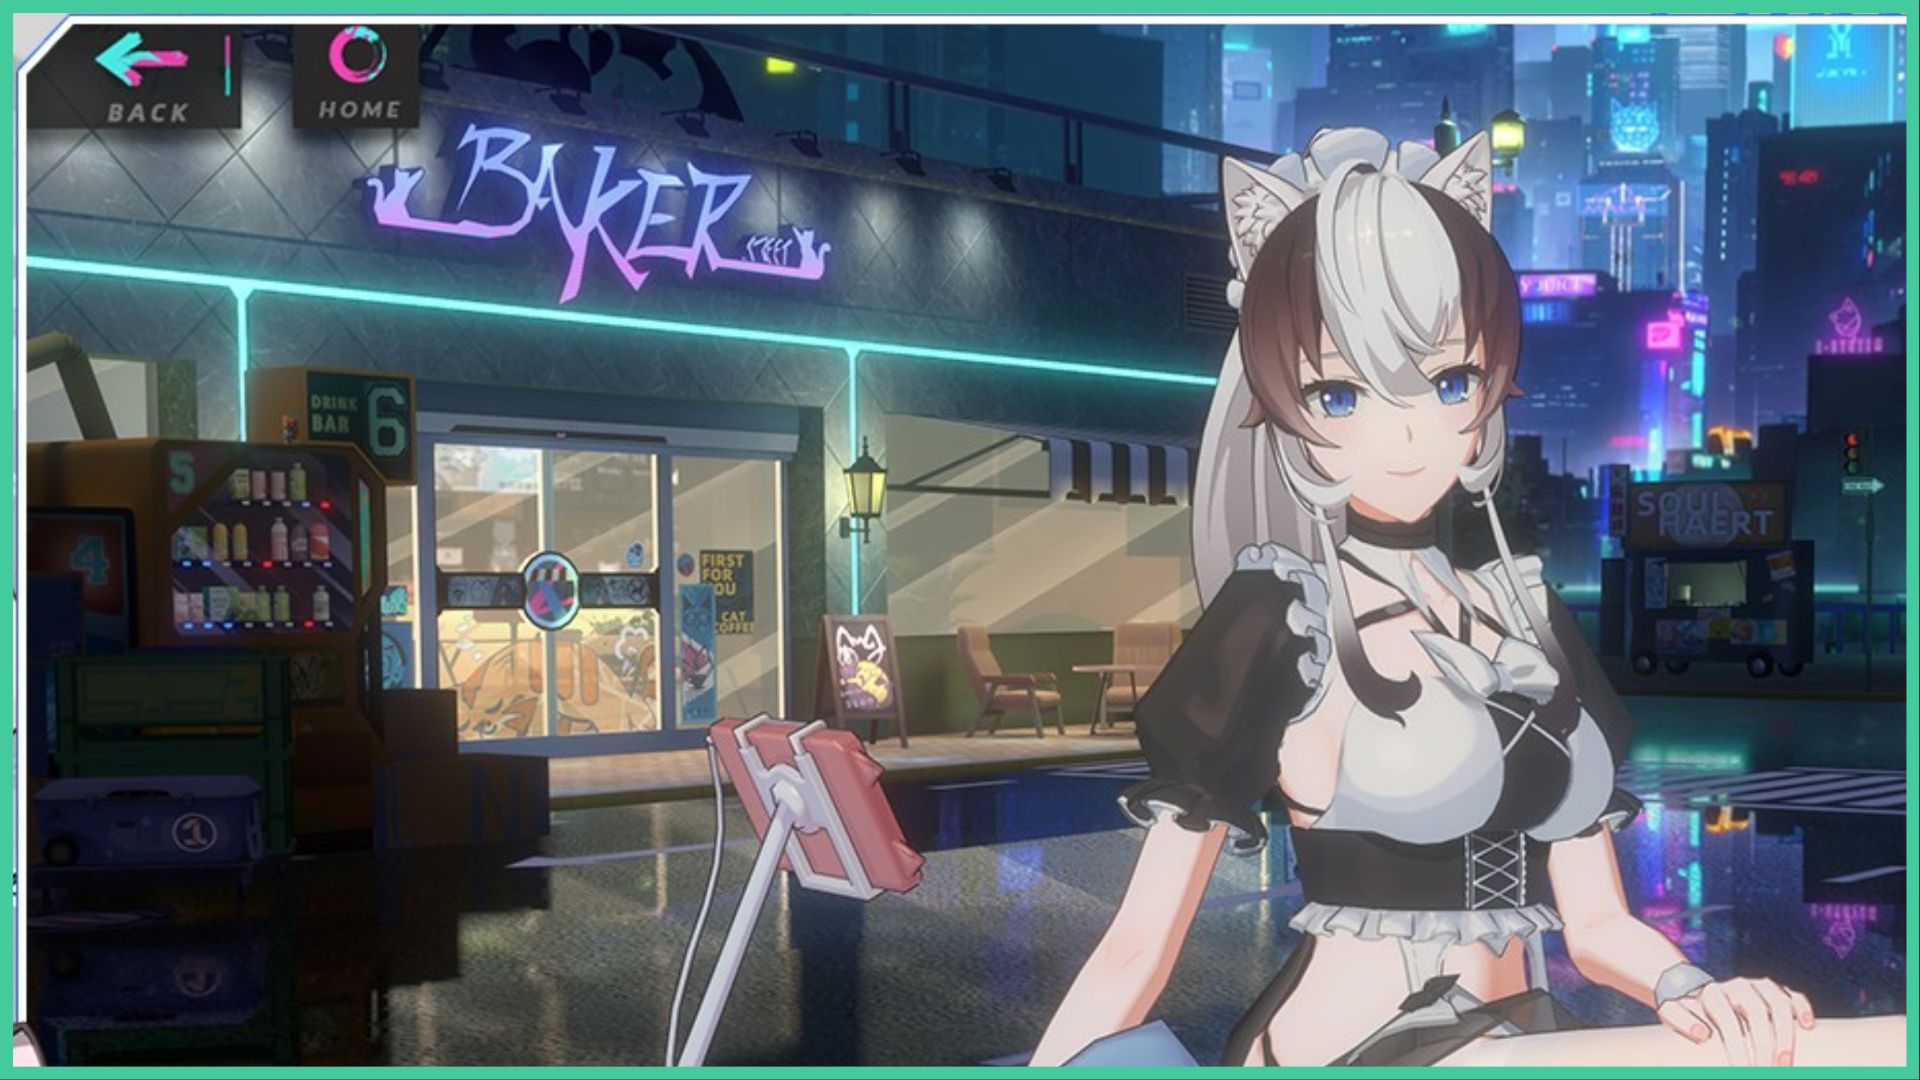 feature image for our cat fantasy codes, the image features a screenshot from the game of a cat girl wearing a maid costume sat in front of the baker cat cafe as the neon signs around the city glow, with a futuristic cityscape in the background